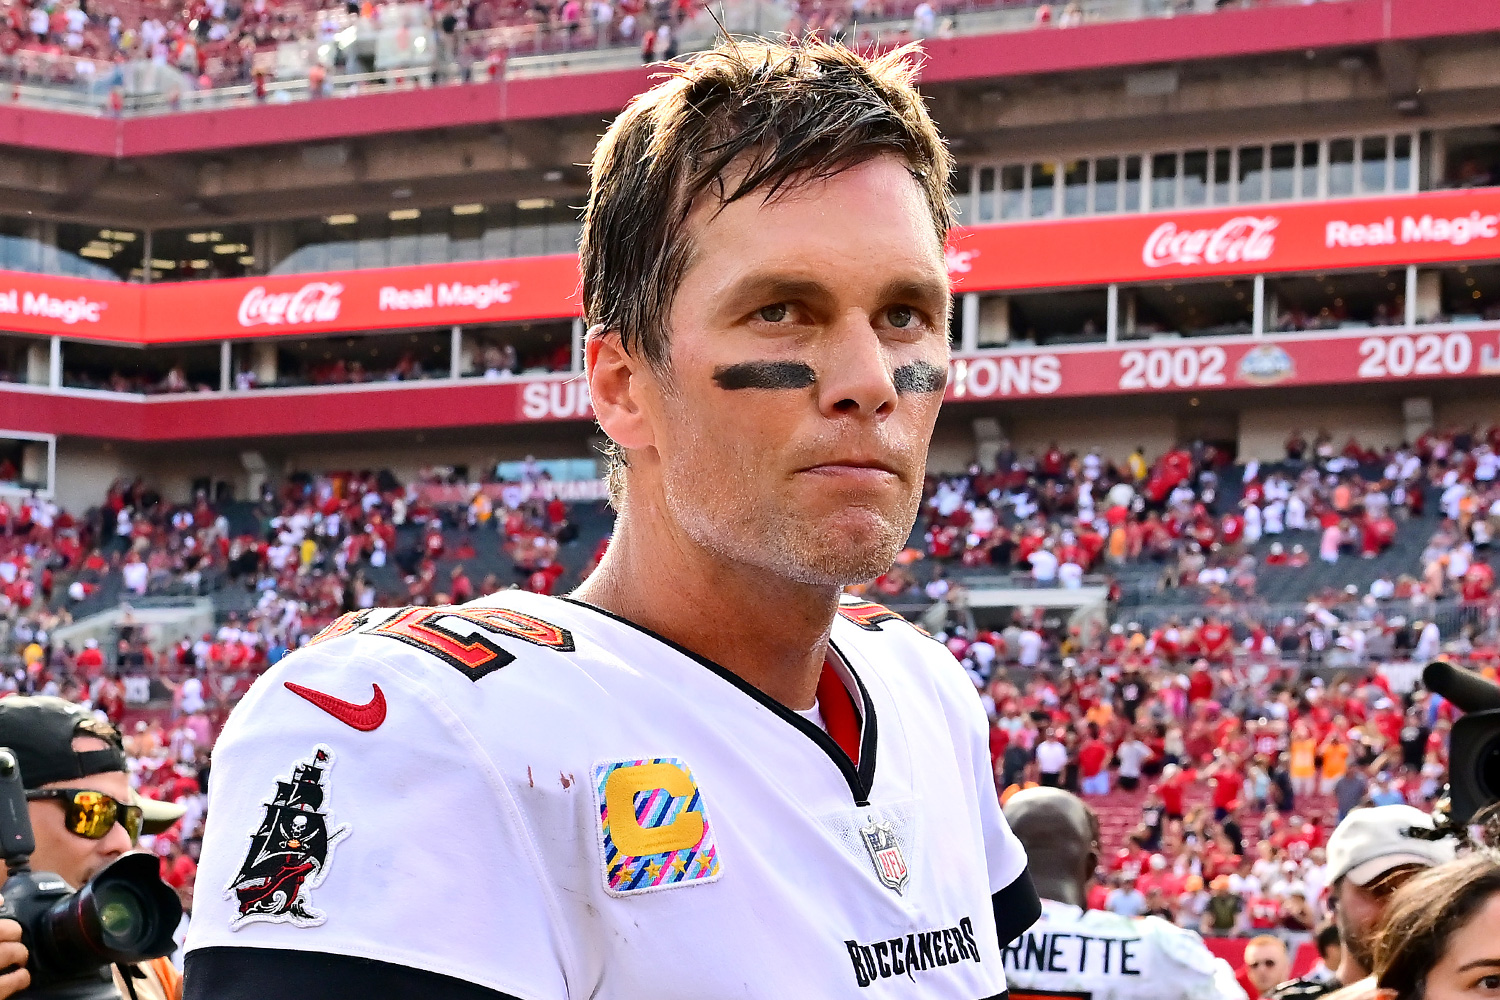 Tom Brady #12 of the Tampa Bay Buccaneers walks off the field after defeating the Atlanta Falcons 21-15 at Raymond James Stadium on October 09, 2022 in Tampa, Florida.